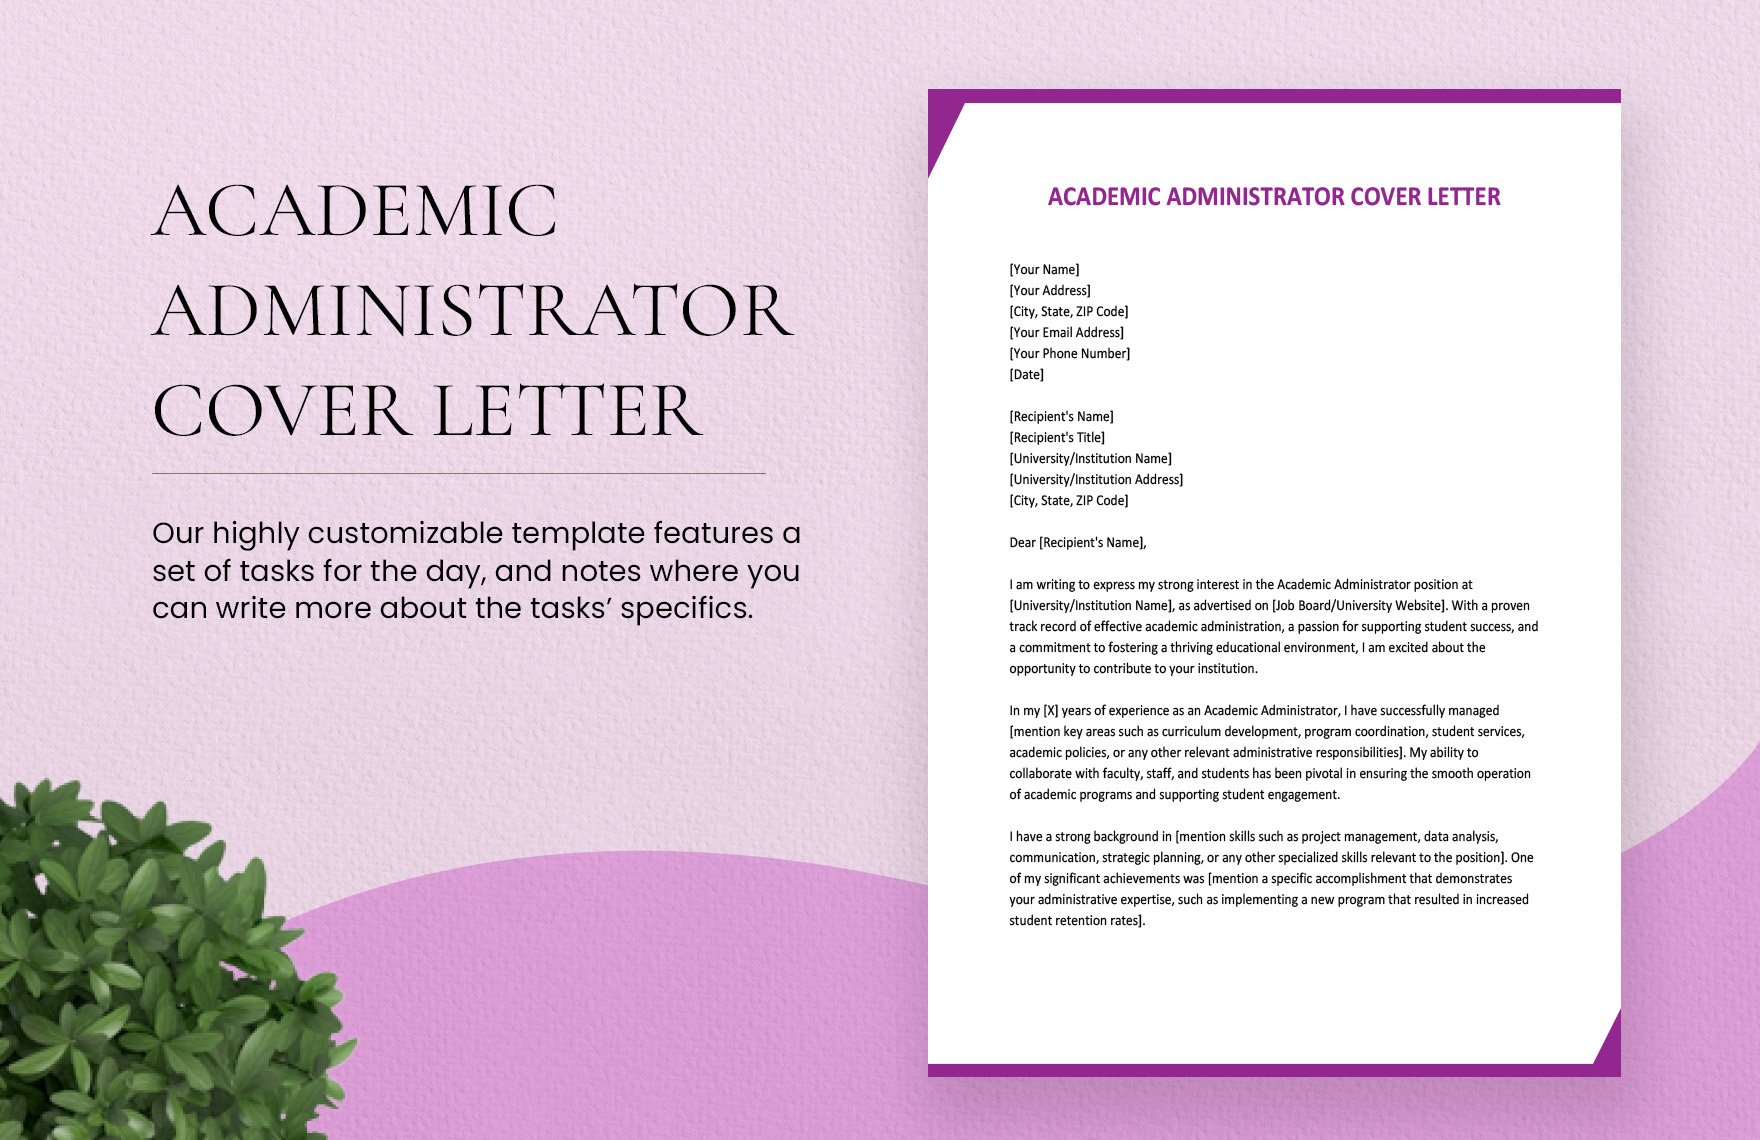 Academic Administrator Cover Letter in Word, Google Docs